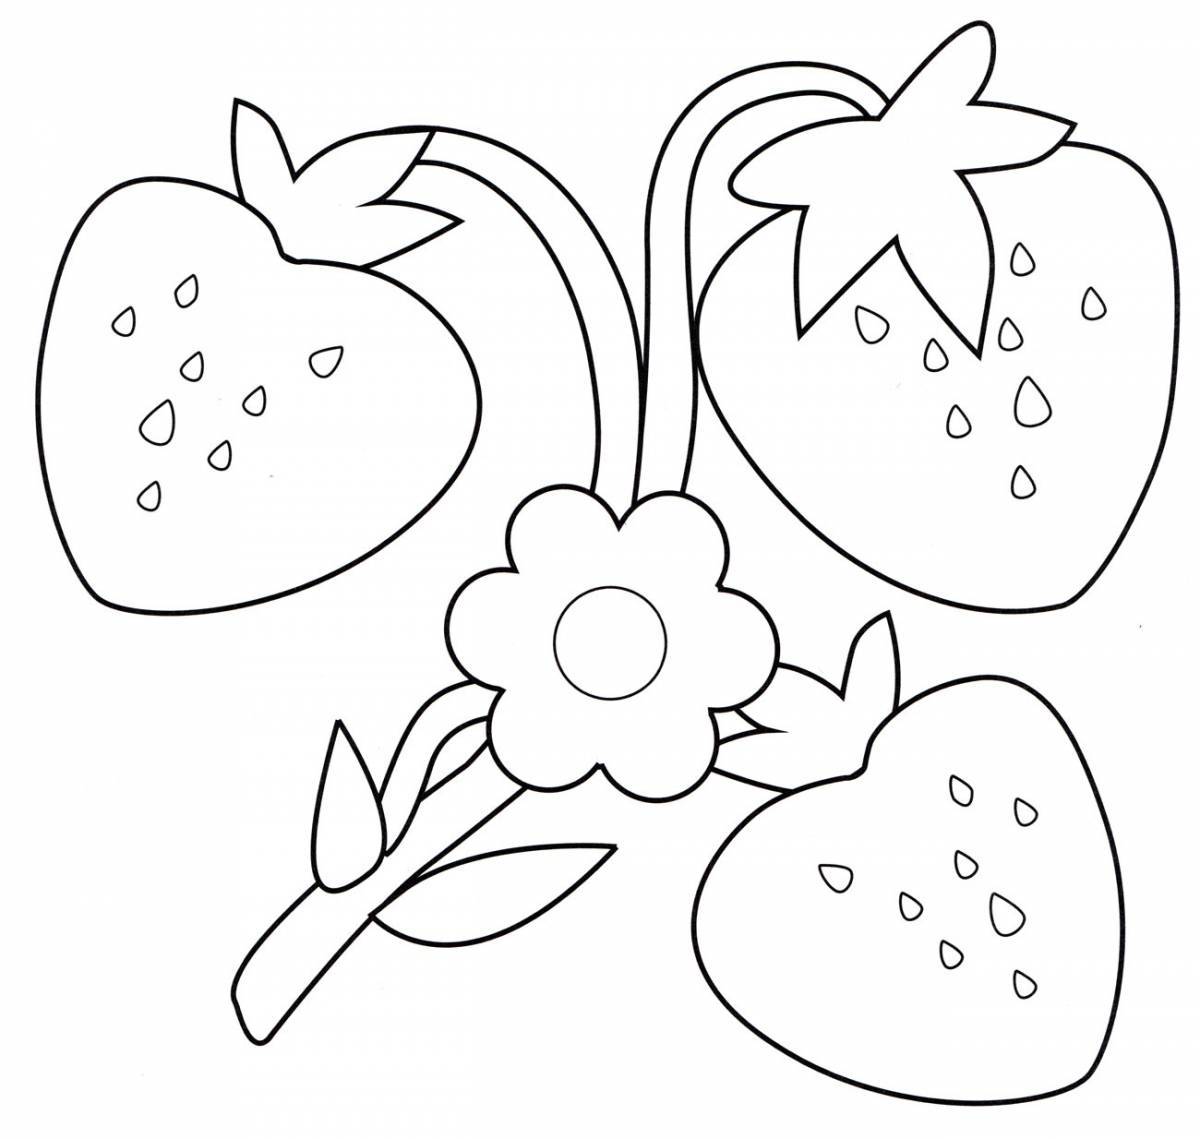 Ecstatic strawberry coloring book for kids